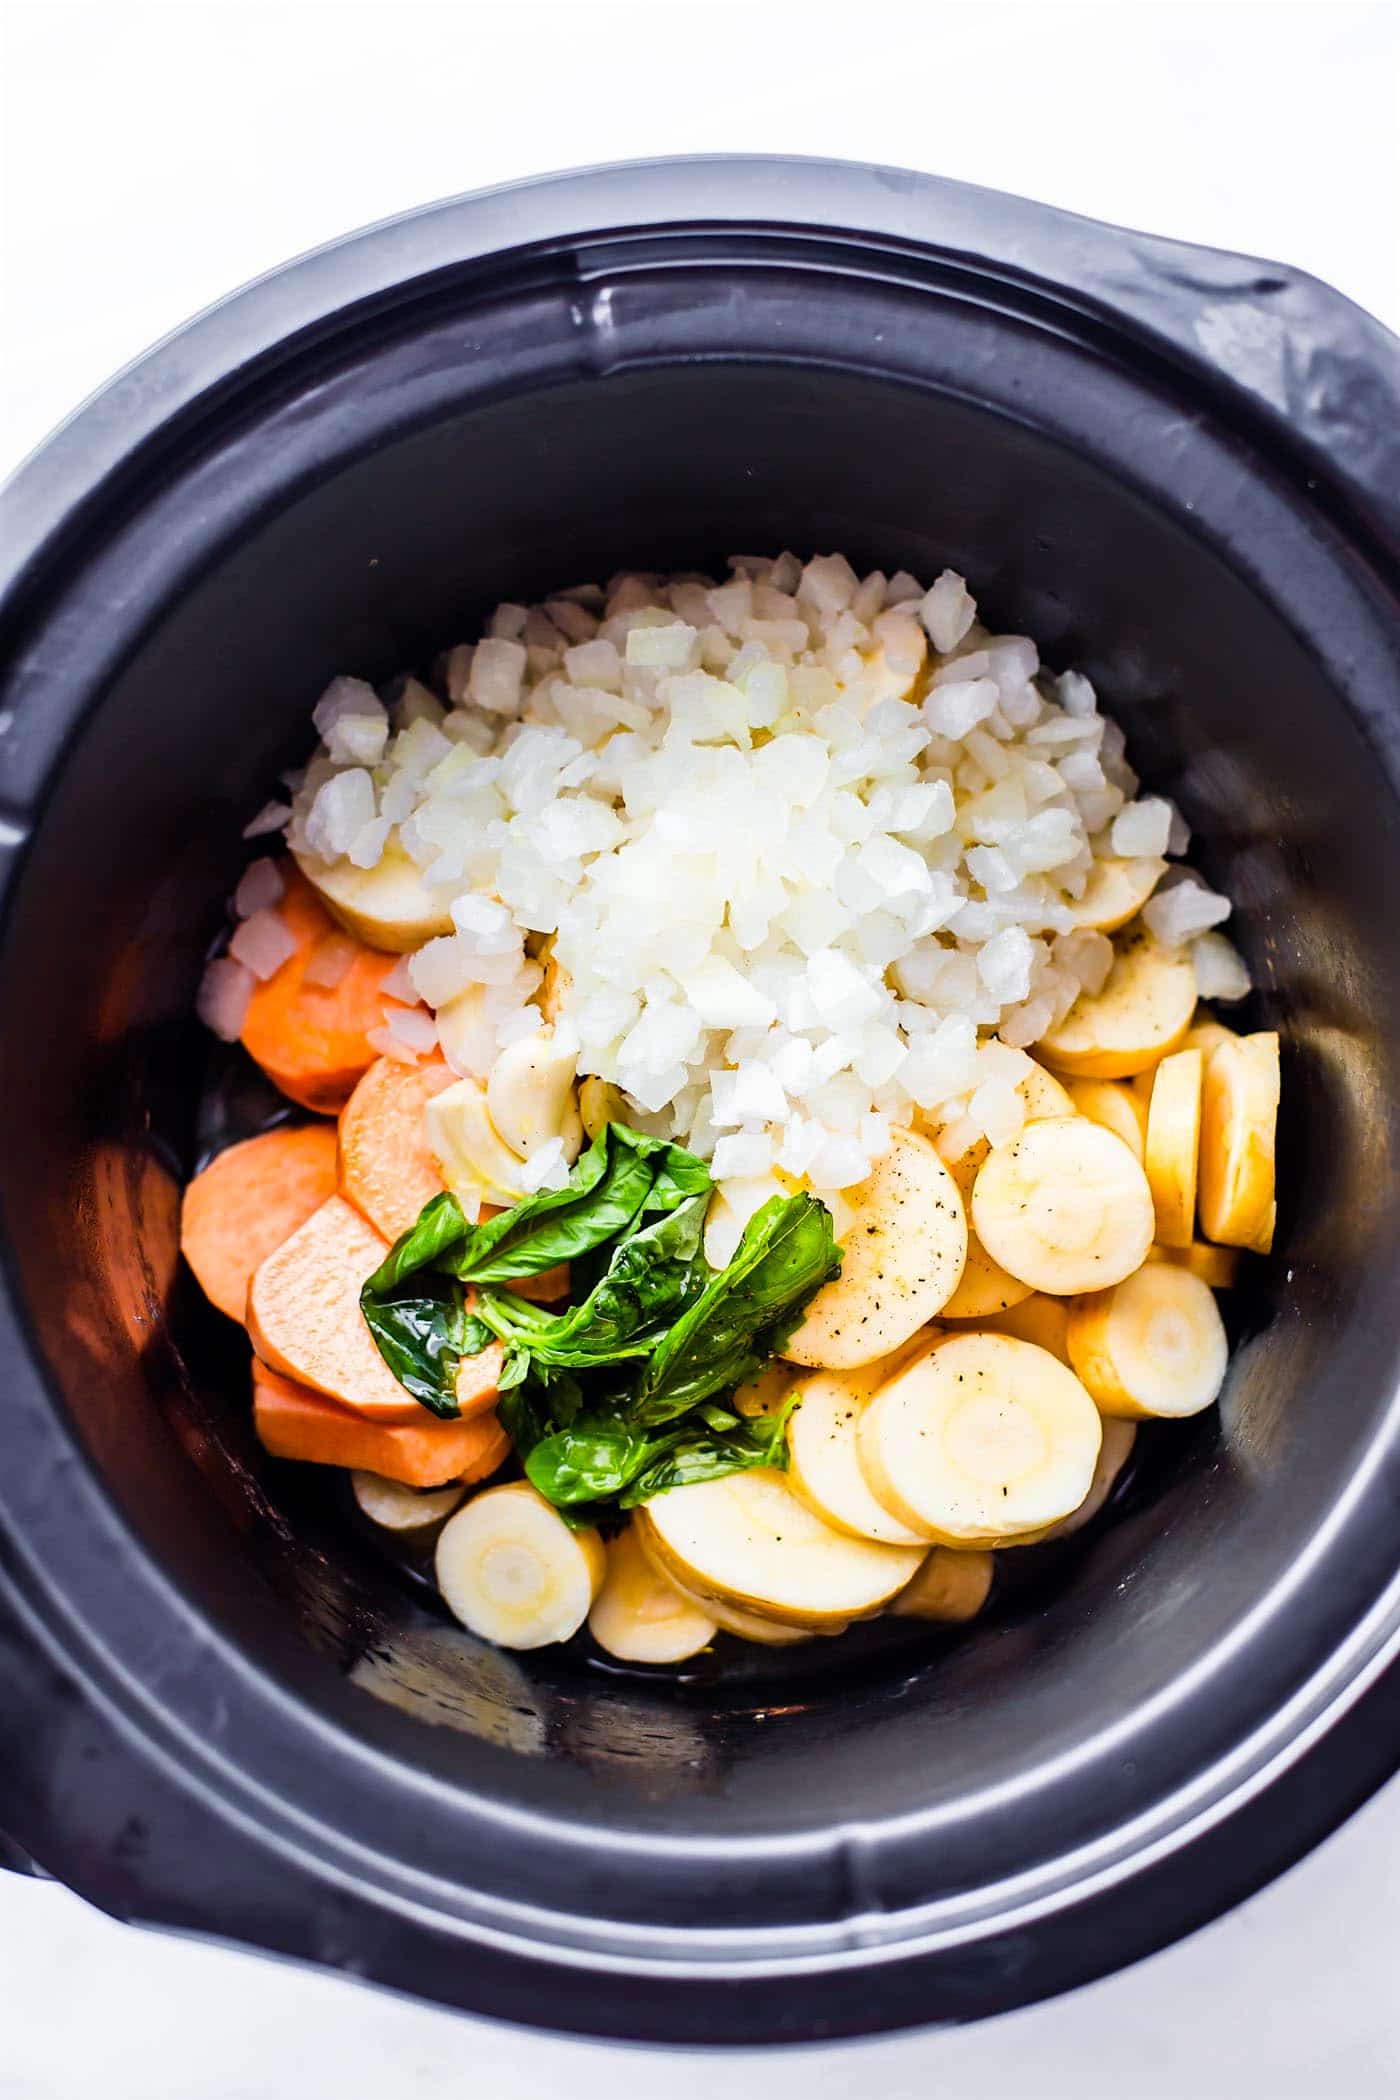 raw onions, potatoes, parsnips, and carrots in a slow cooker